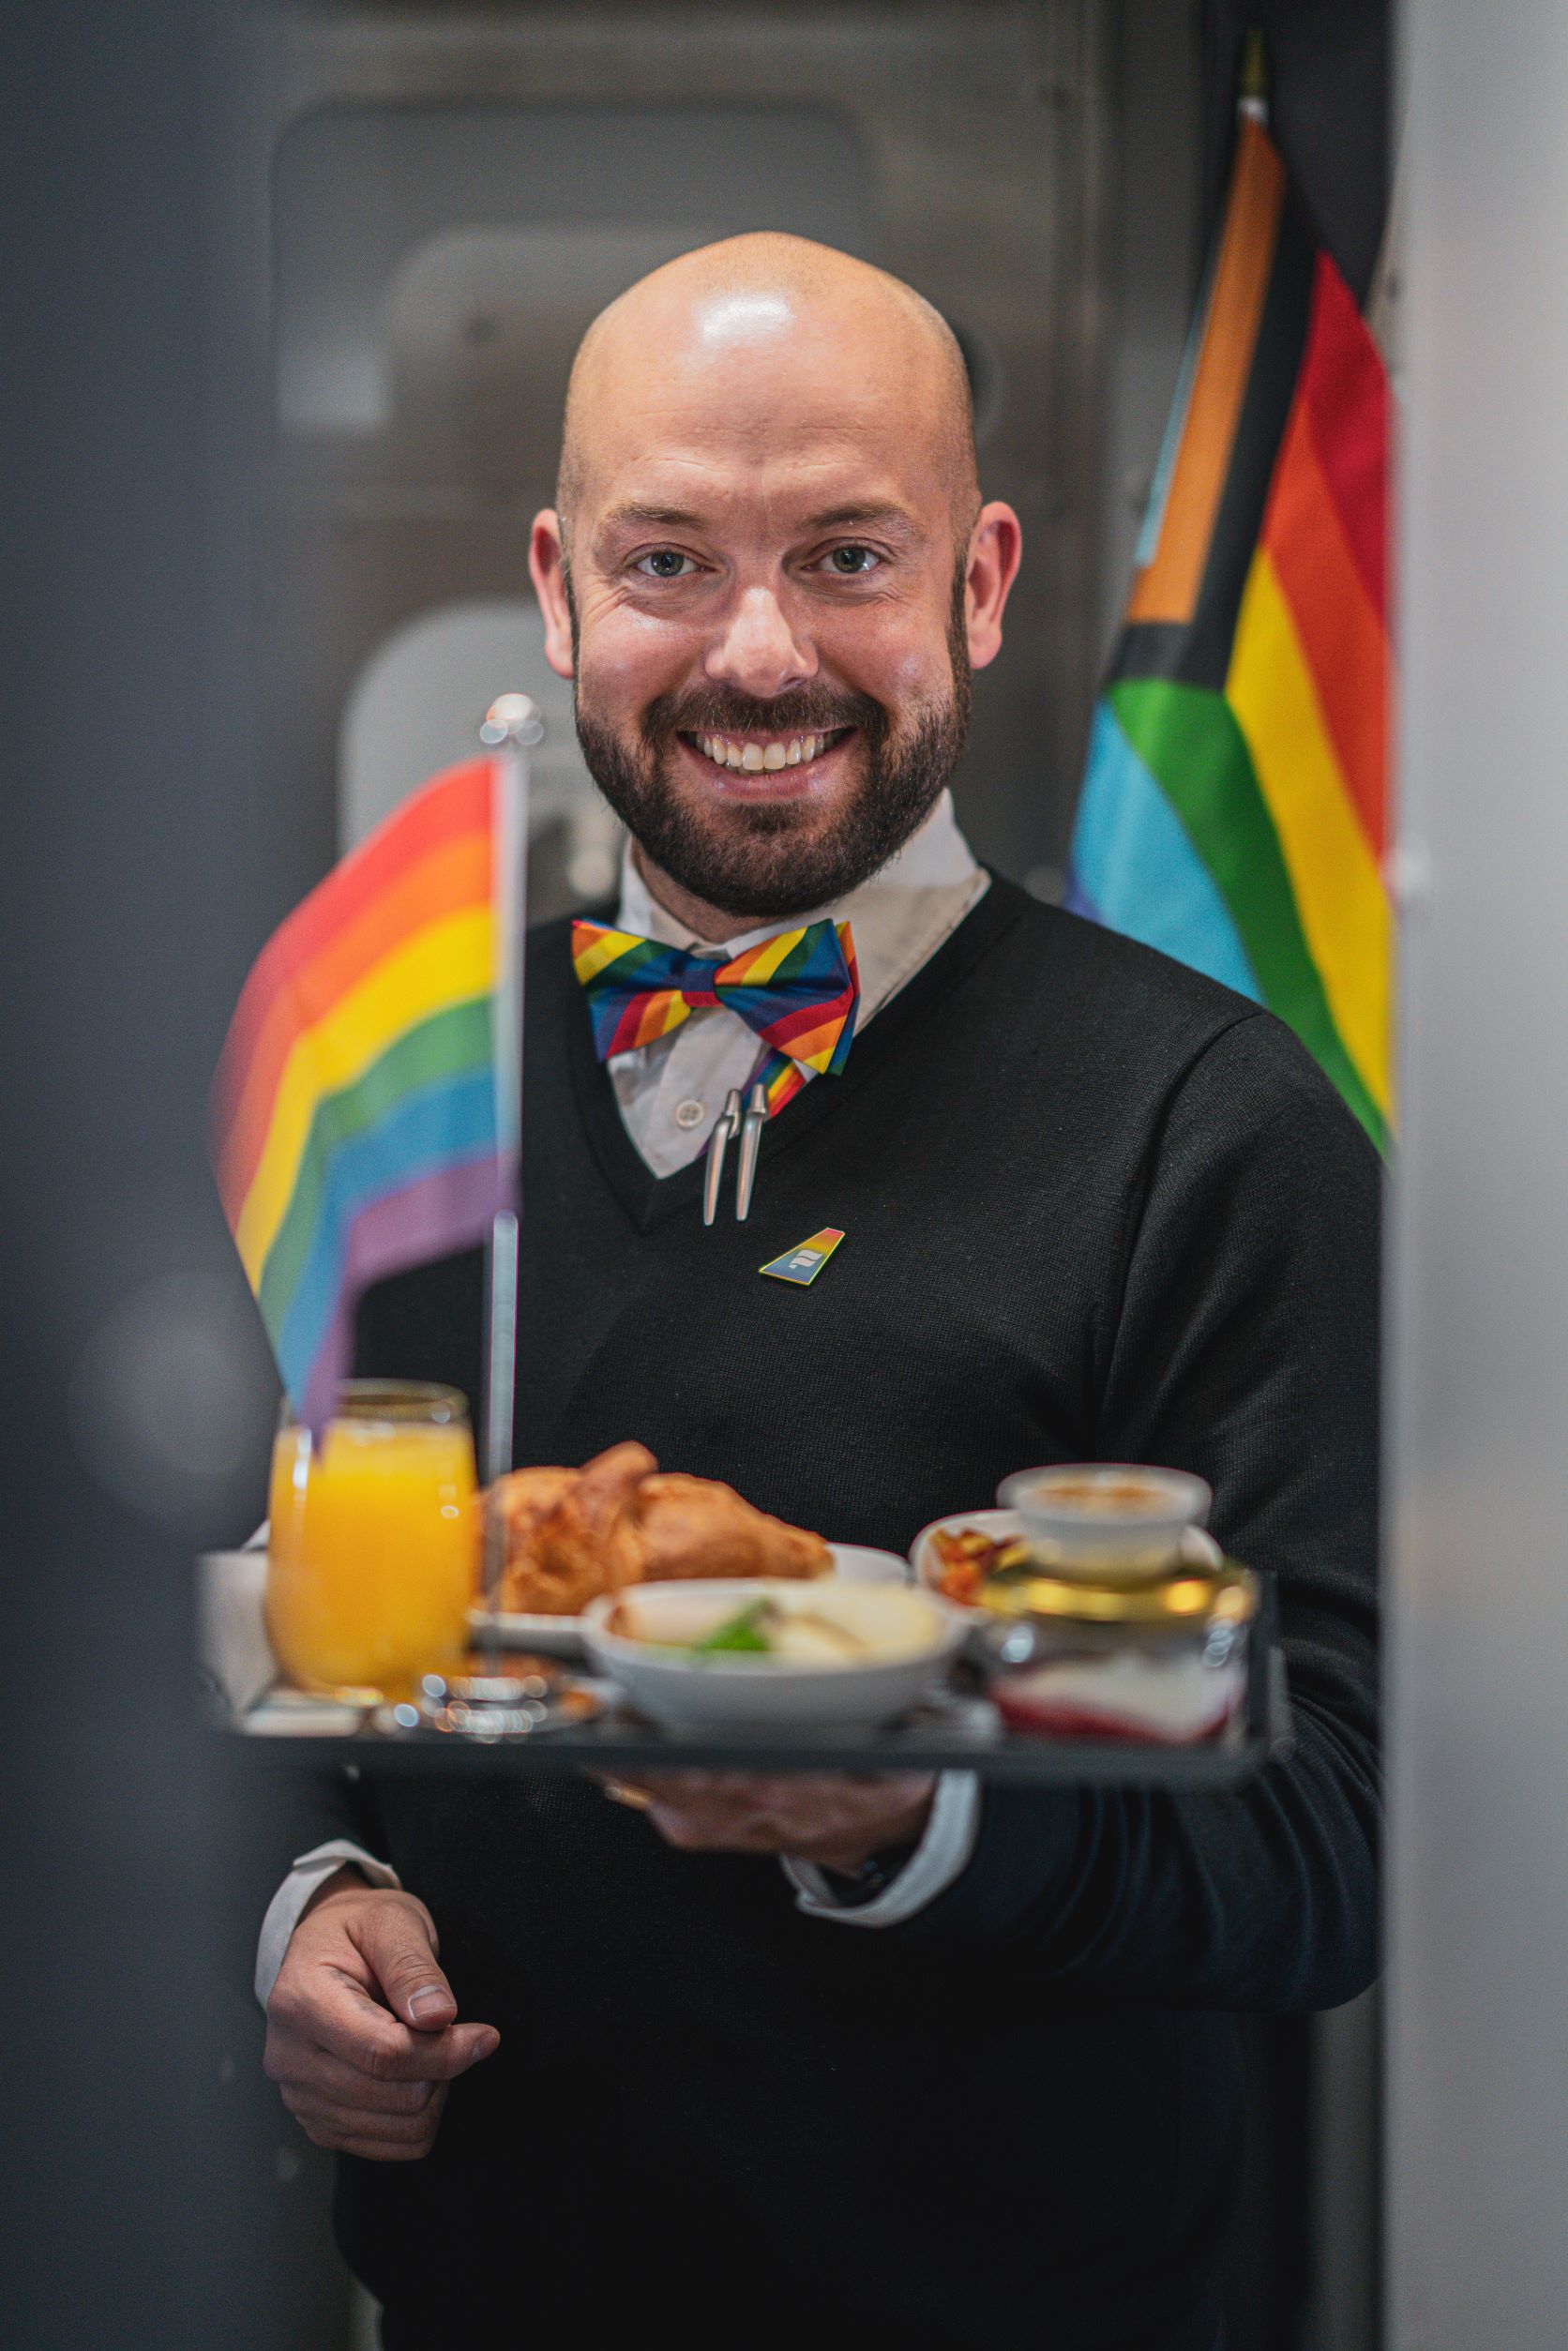 Icelandair Pride flight 2022: cabin crew member serves a tray of food, with rainbow flags in foreground and background